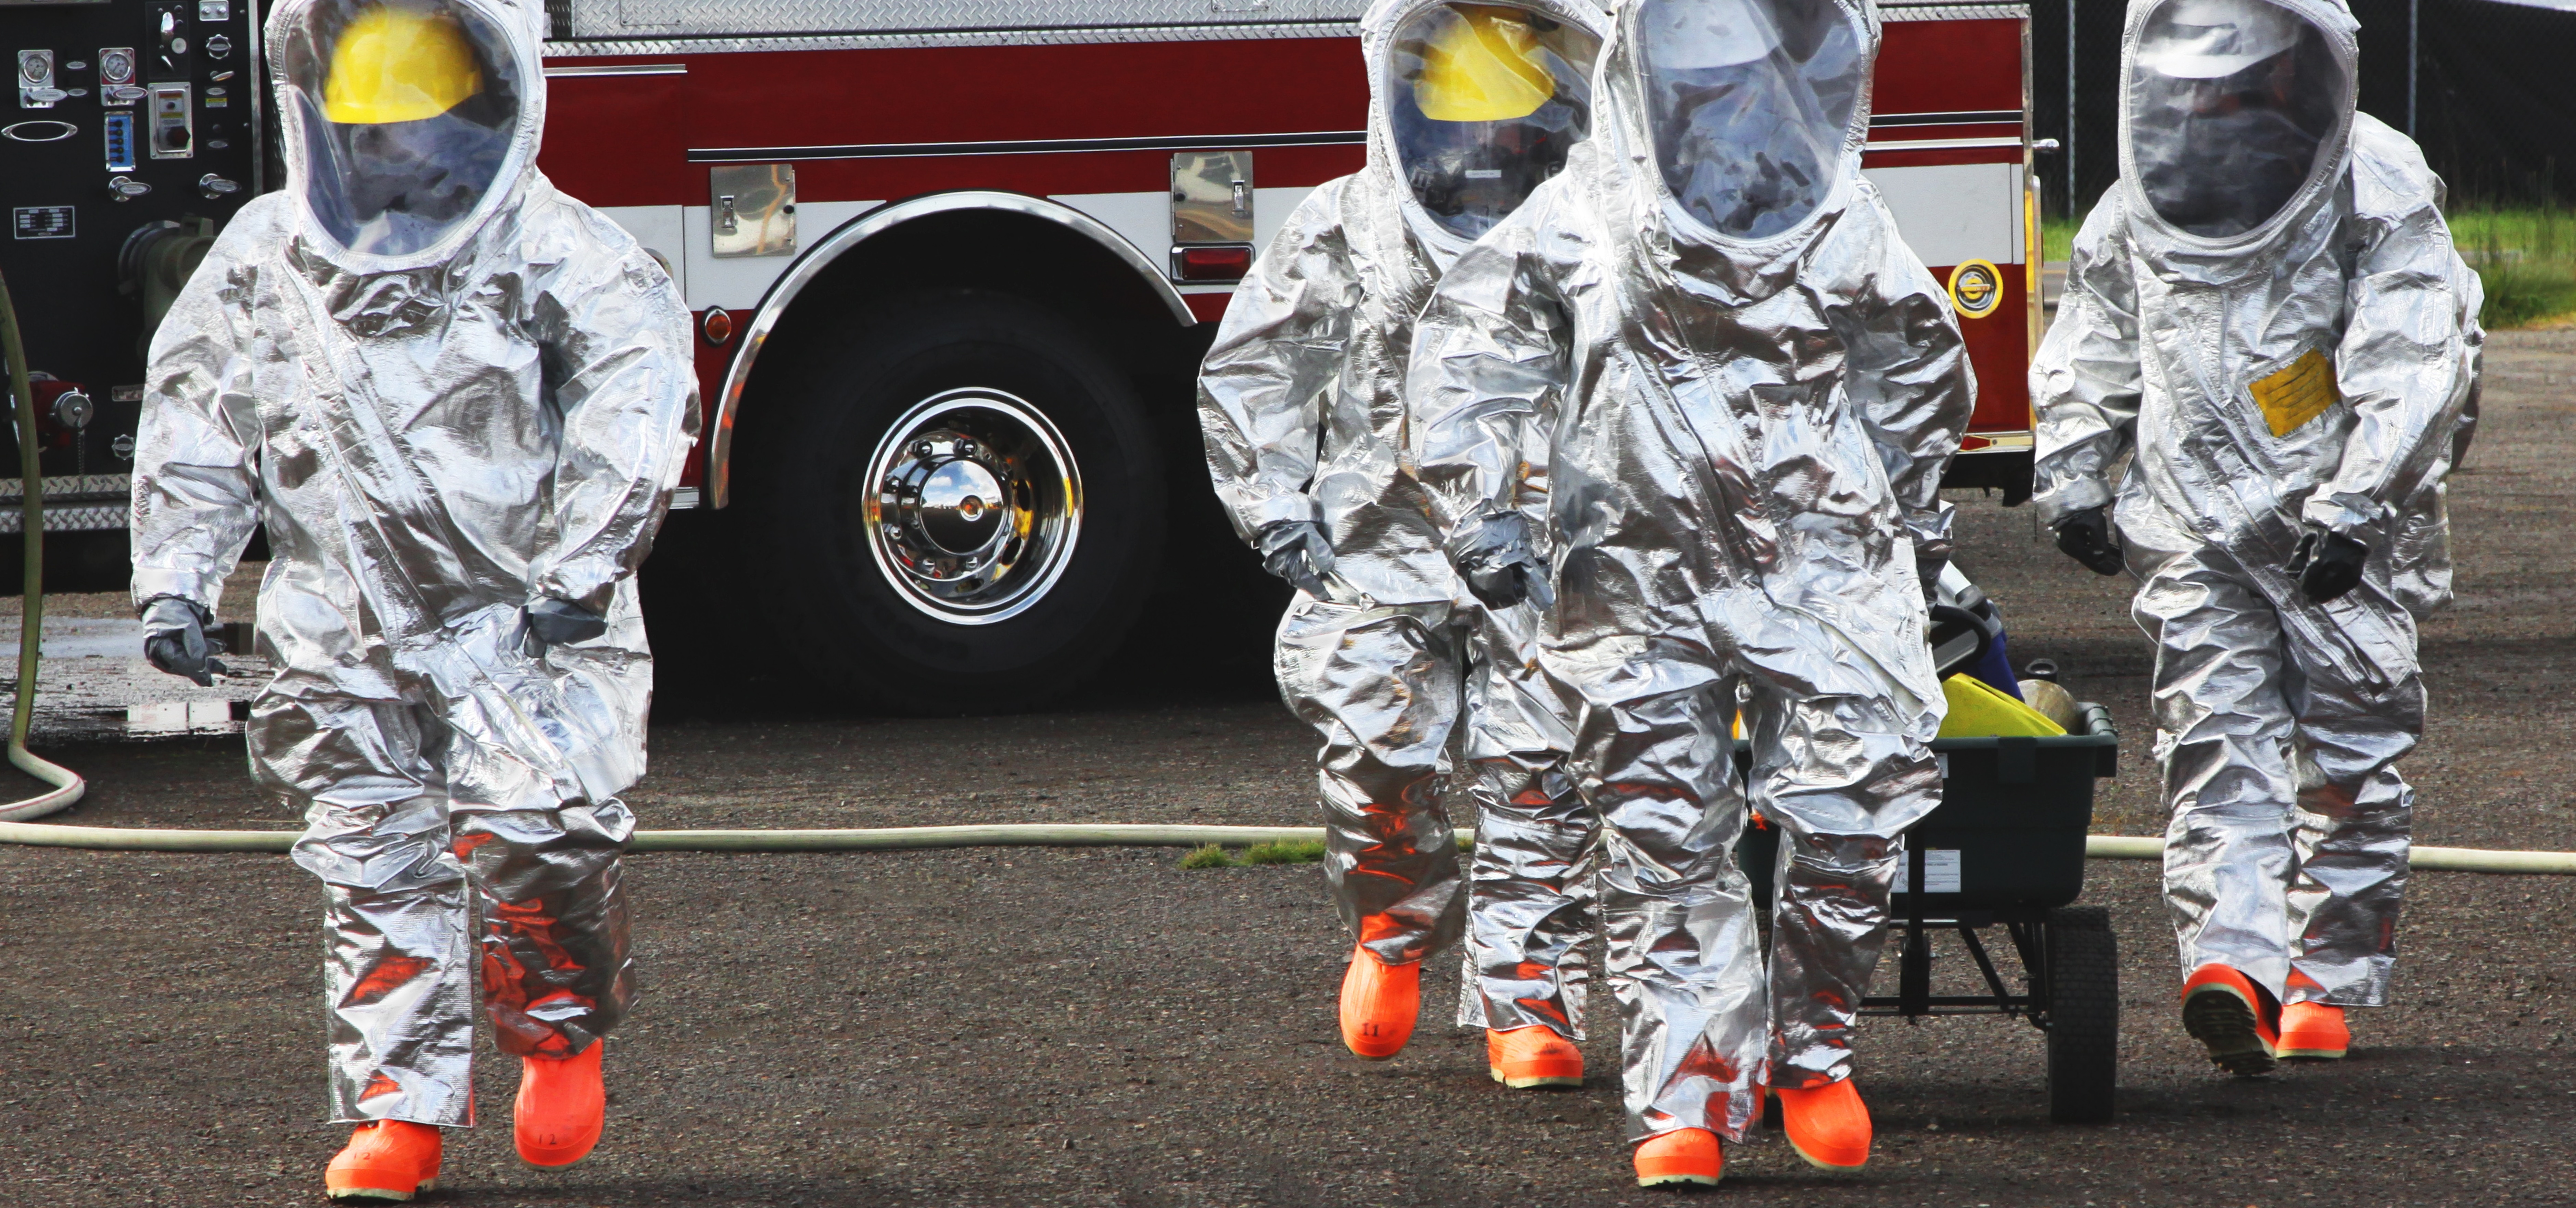 How to Choose Hazmat Training for Employees